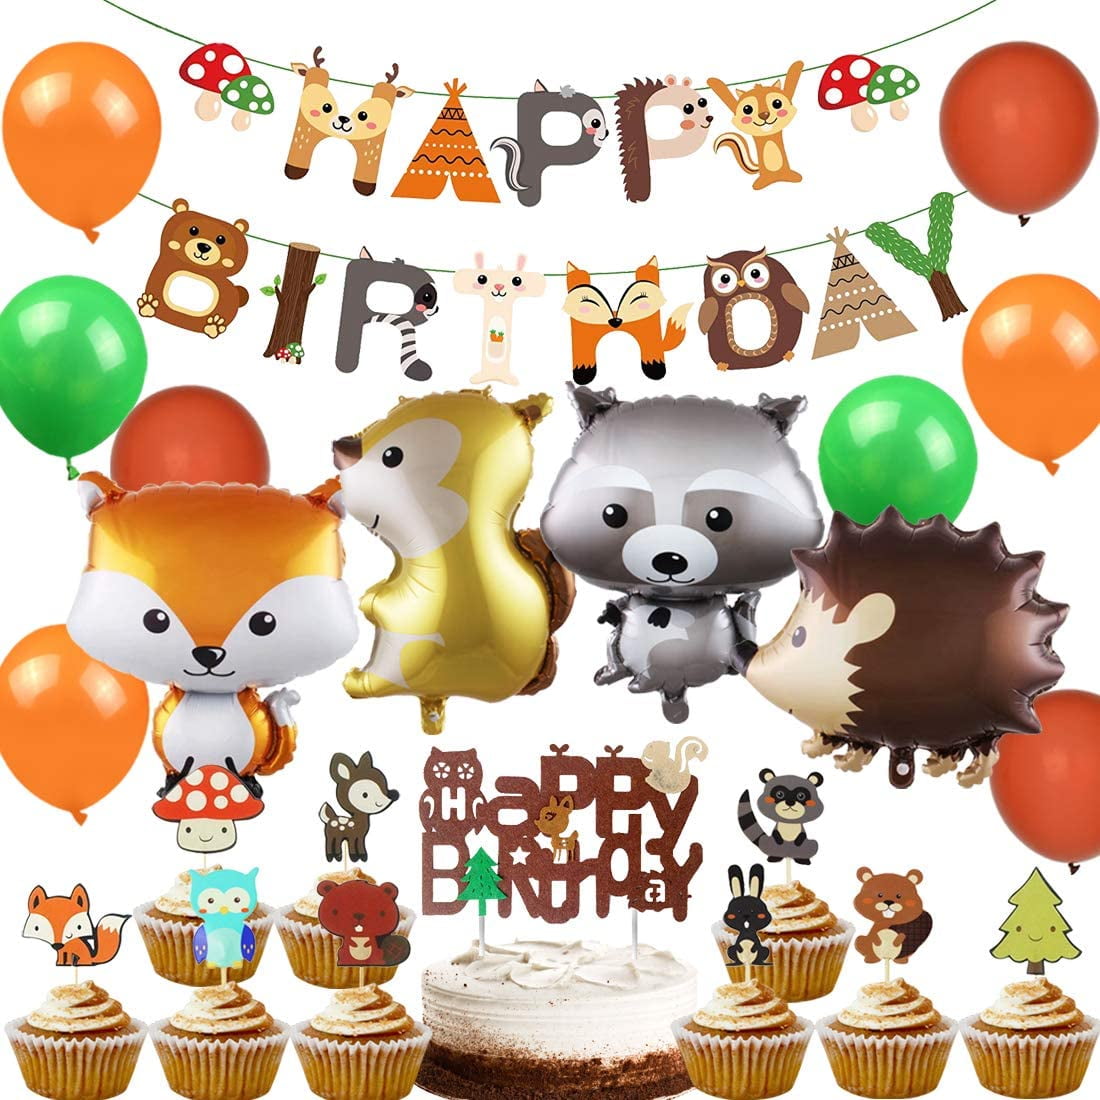 Details about   Digital Candle Number Birthday Cake Topper Heart Fashion New Party Decorations 